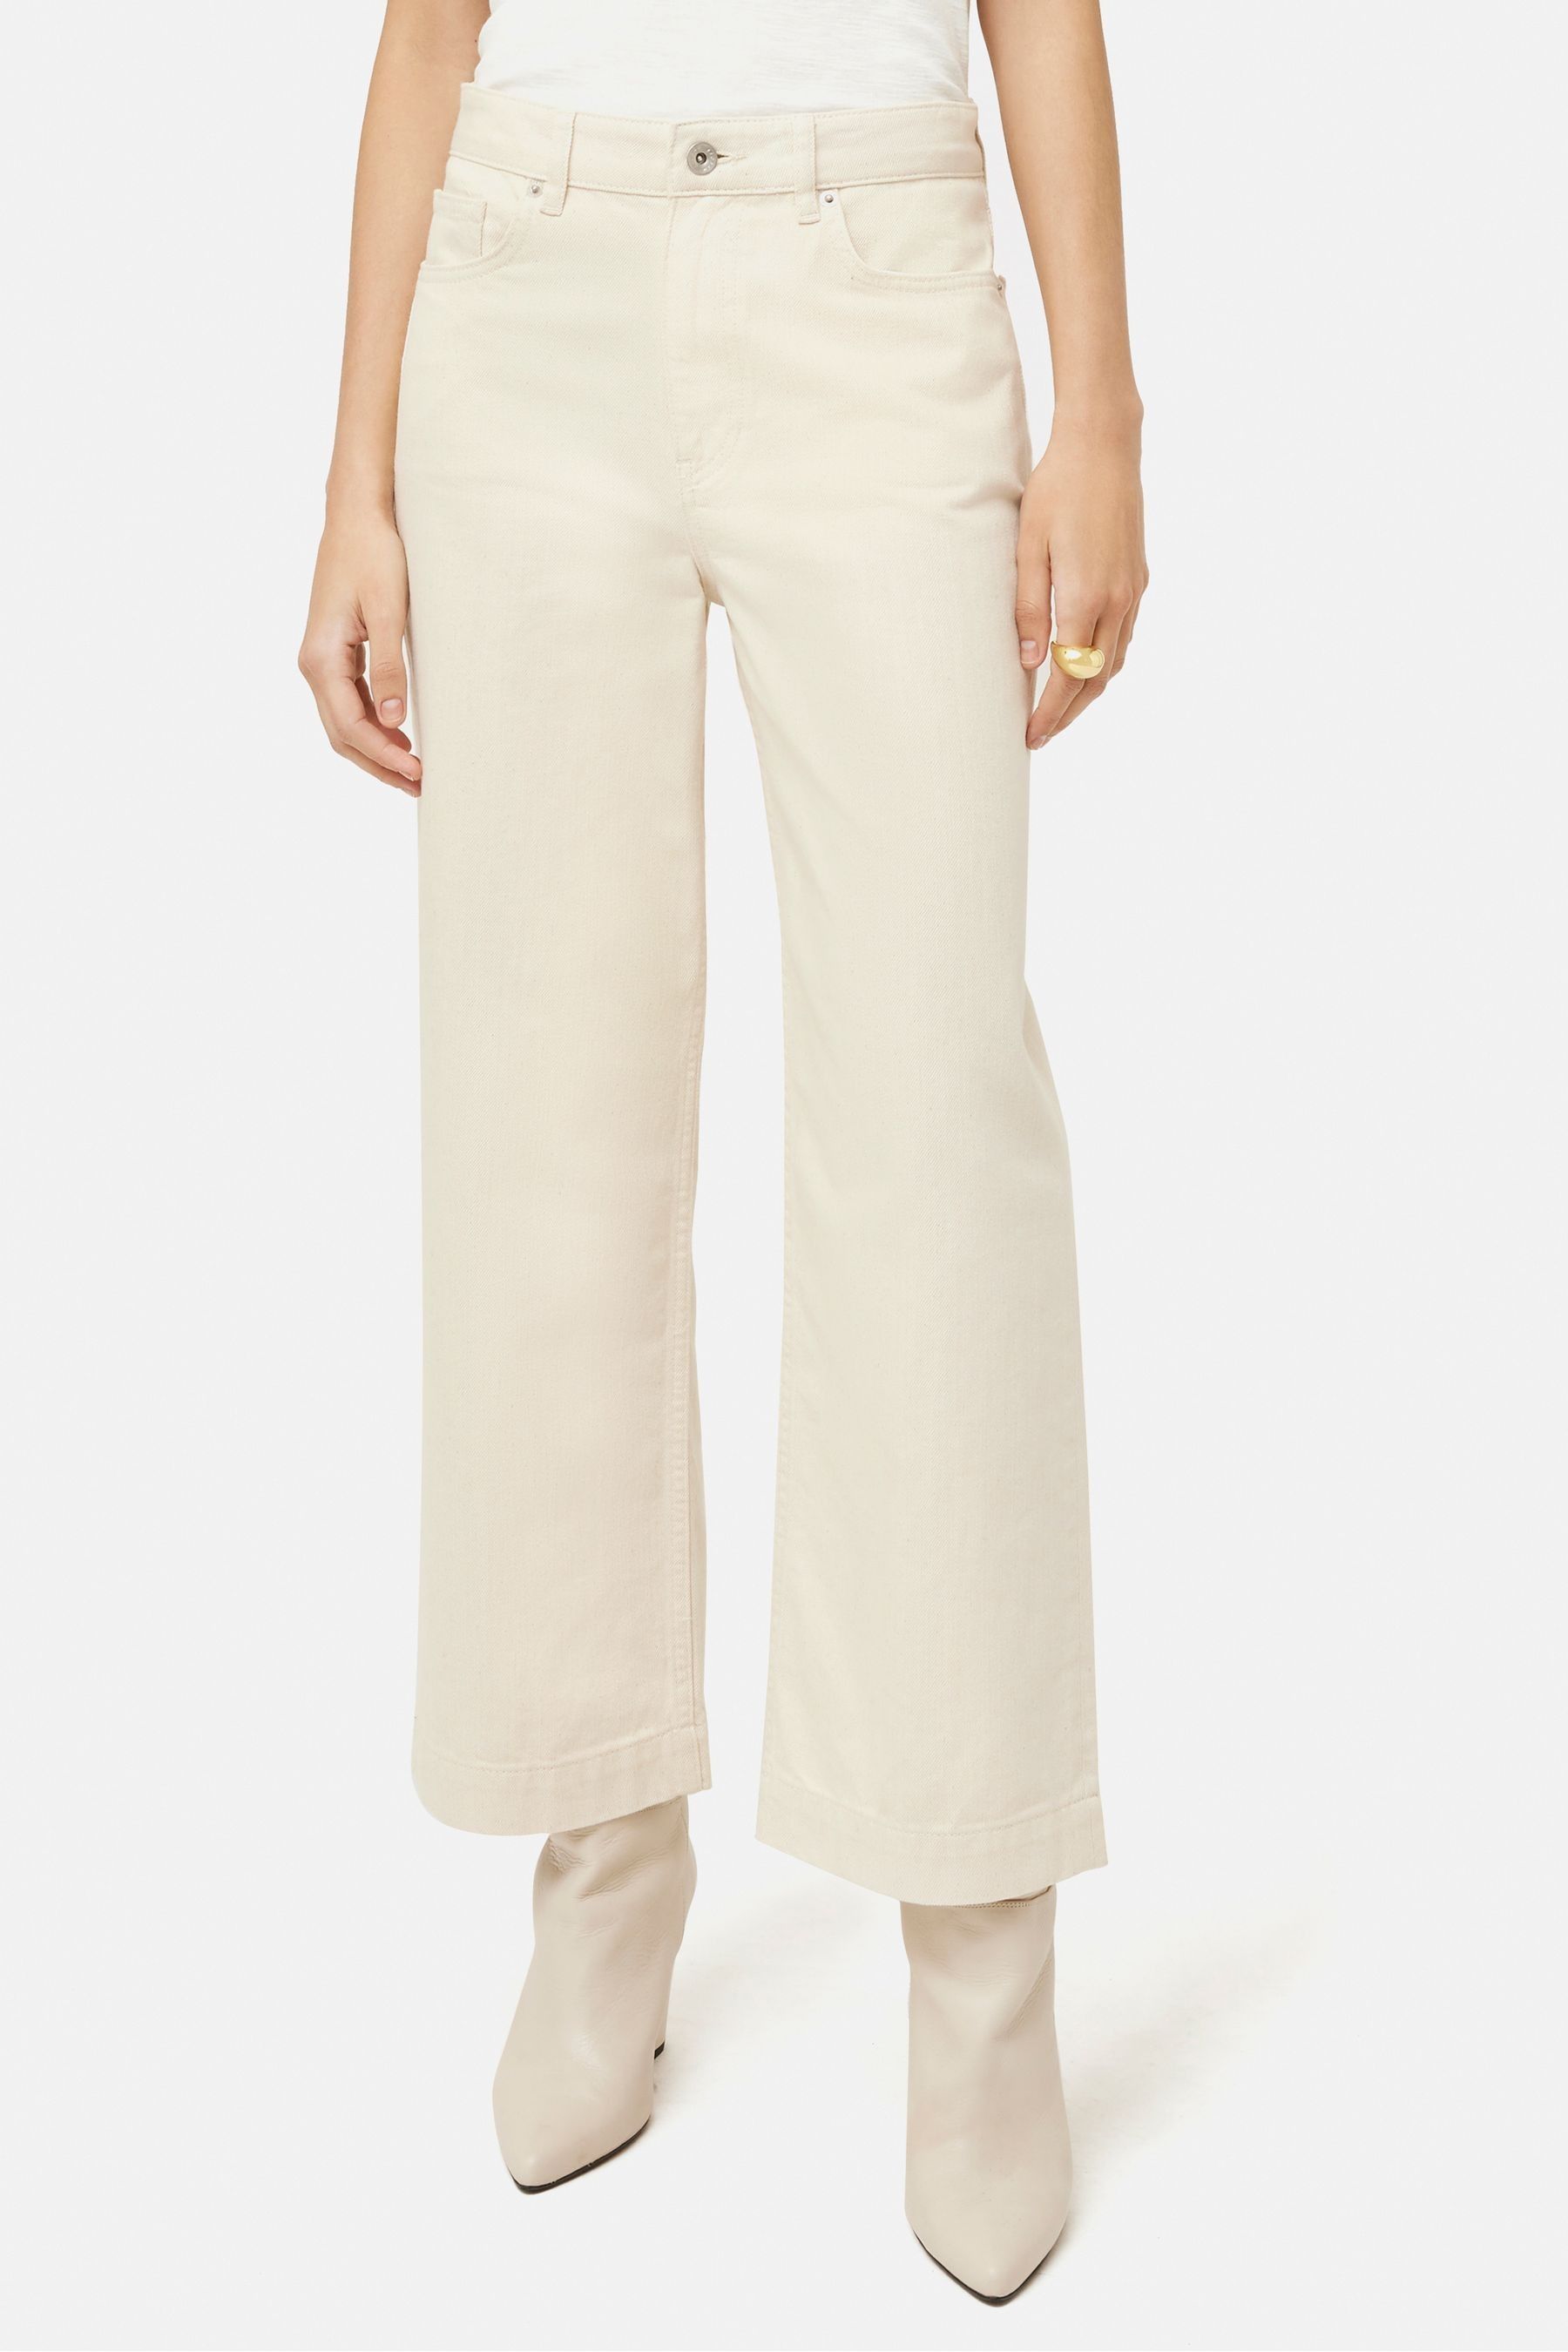 Buy Jigsaw Cream Tyne Wide Leg Jeans from the Next UK online shop